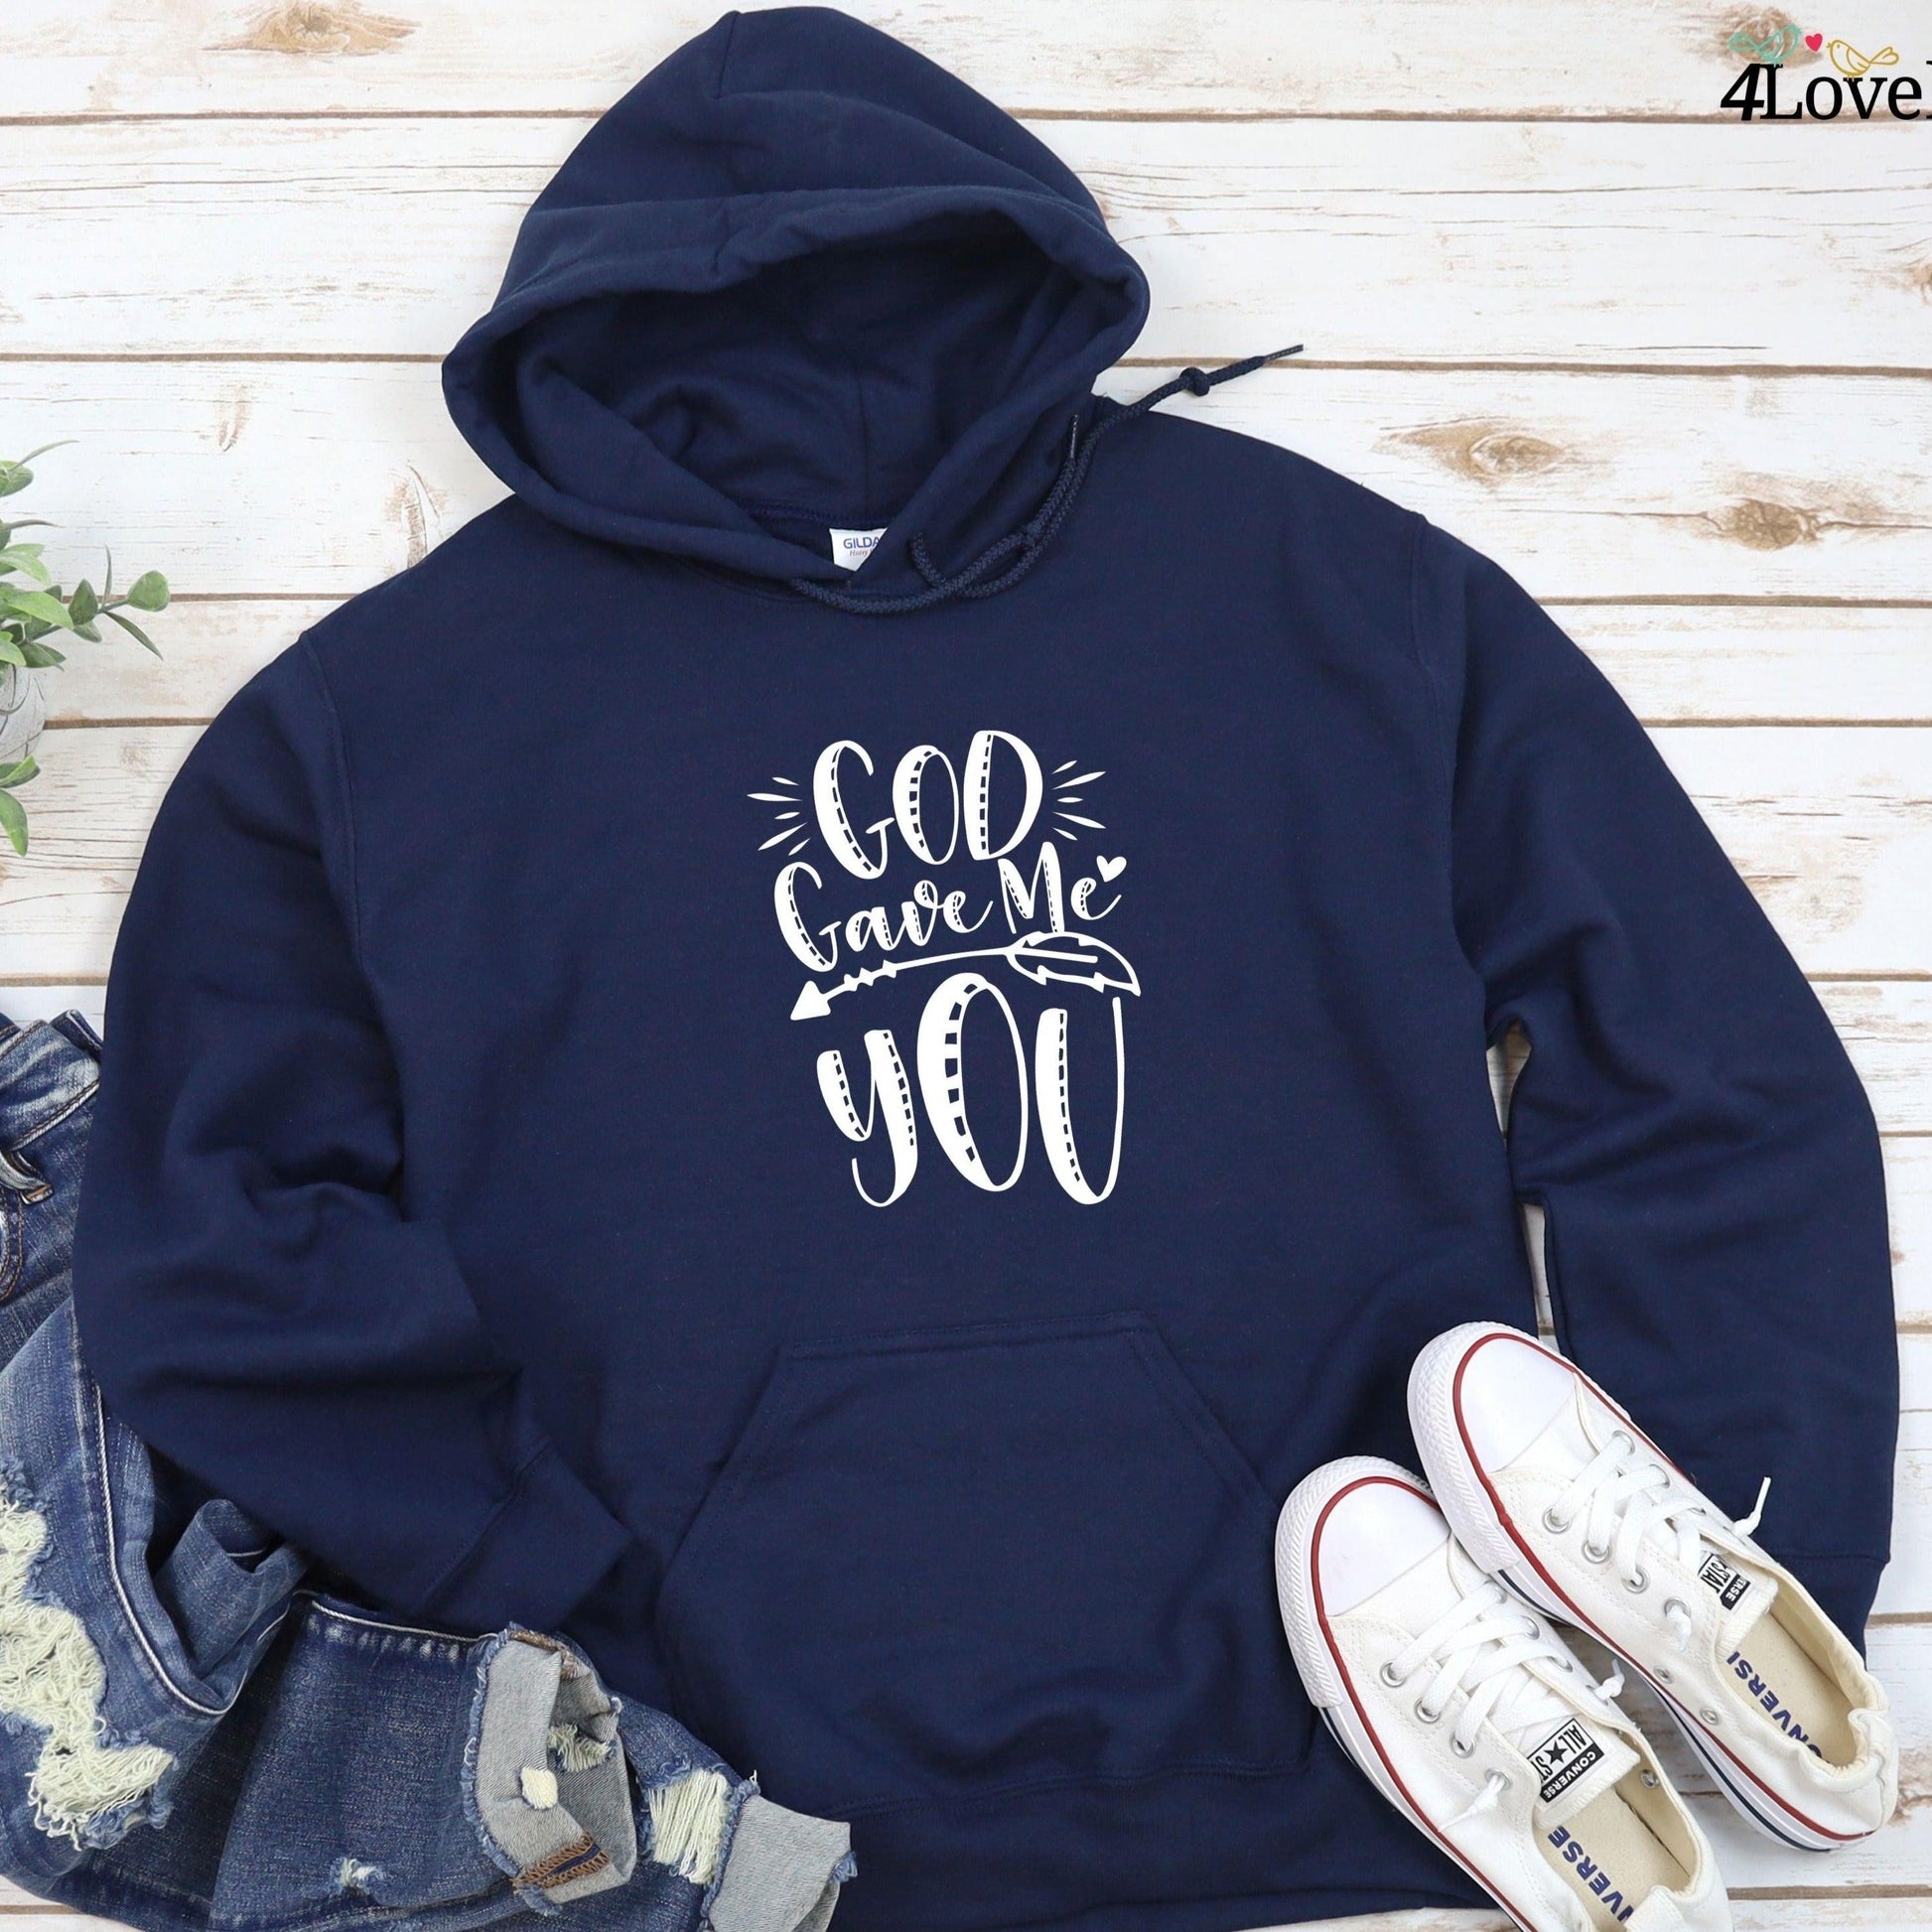 Charming God Gave Me You Couple Matching Outfits: Perfect for Lovers, Valentine's Gift, Beau/Belle Attire - 4Lovebirds